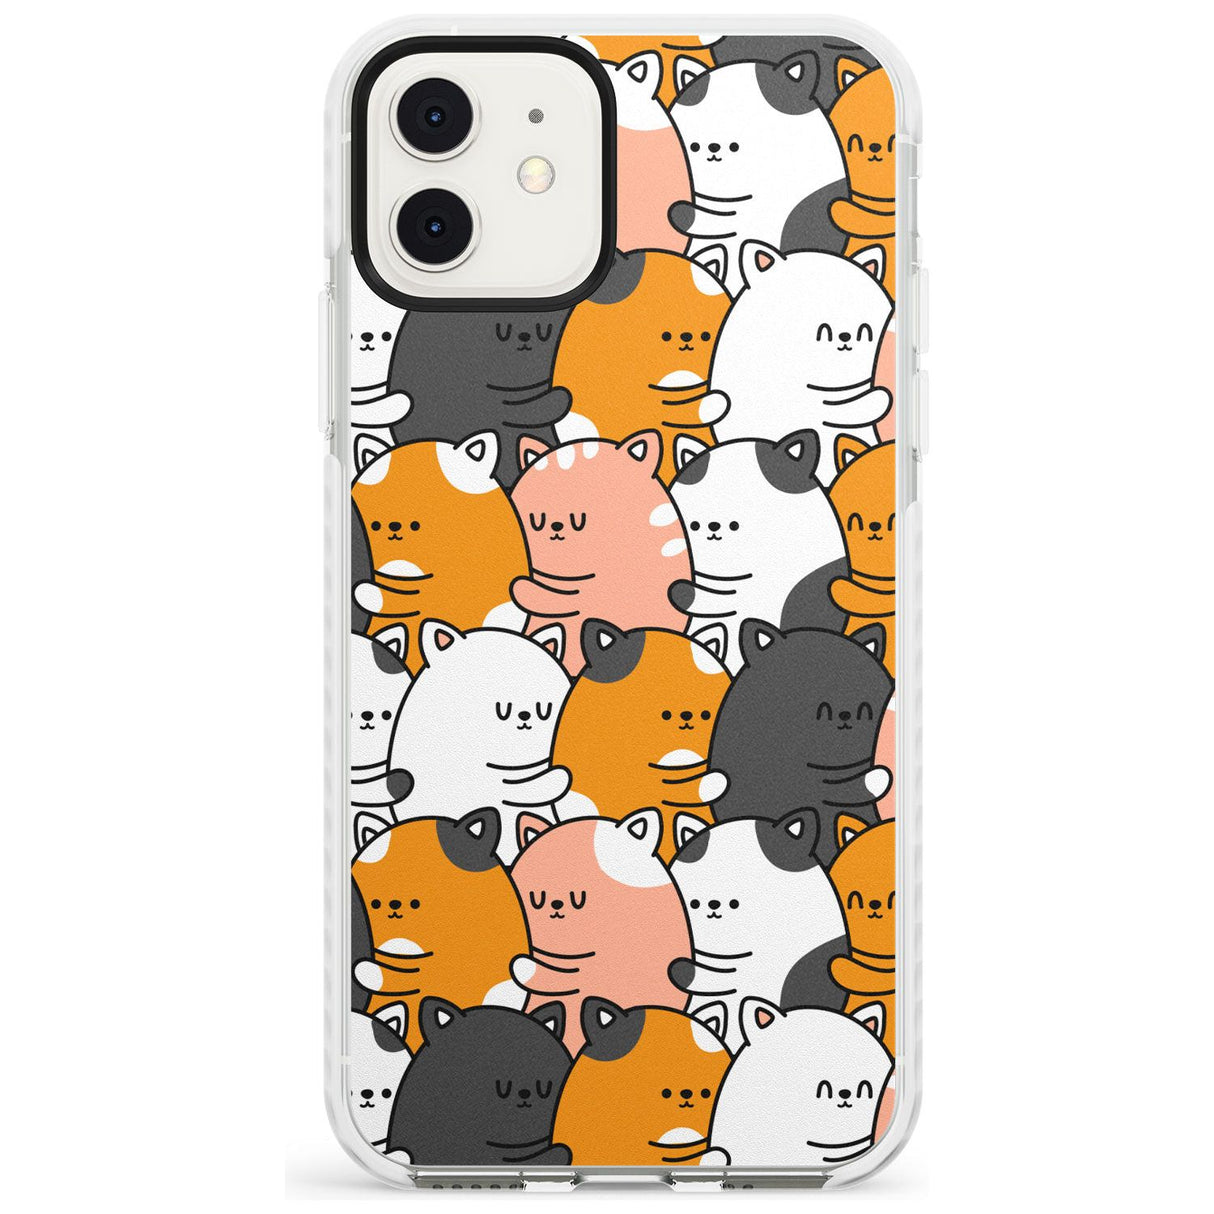 Spooning Cats Kawaii Pattern Impact Phone Case for iPhone 11